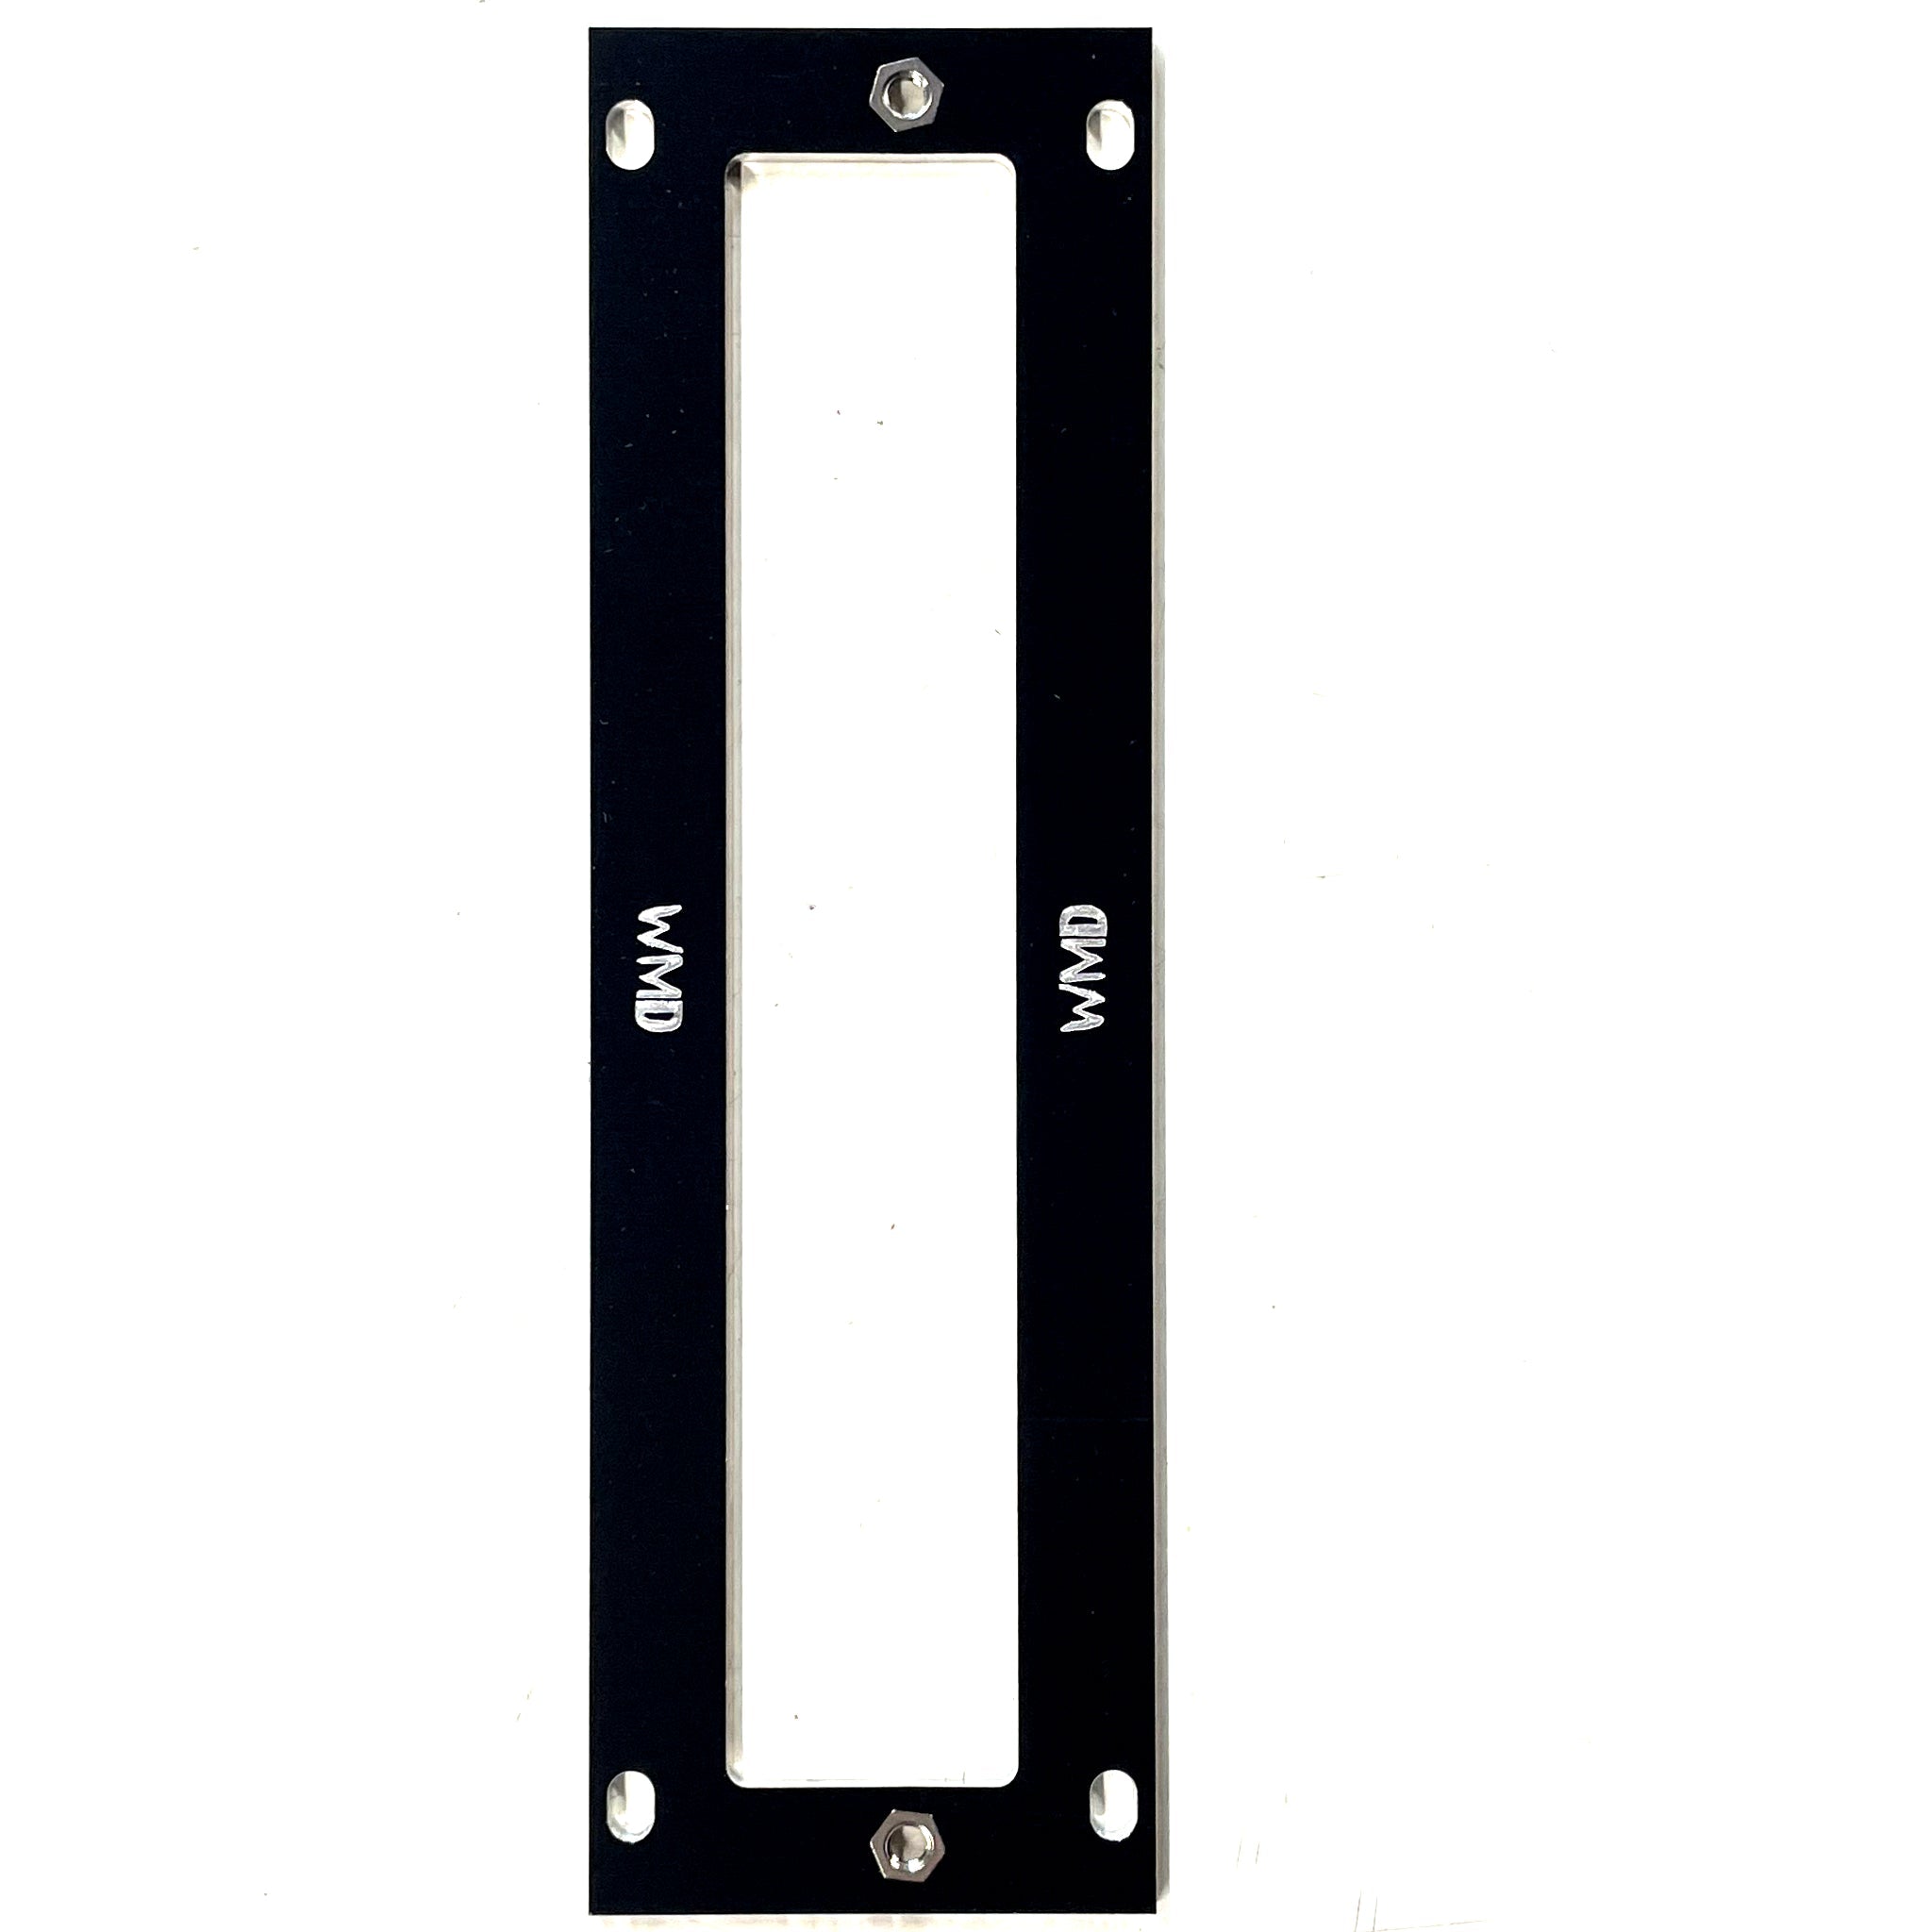 WMD - Modular Accessory - Black Panels for WMD Modules - WMD - 1U to 4HP Adapter - accessory - -